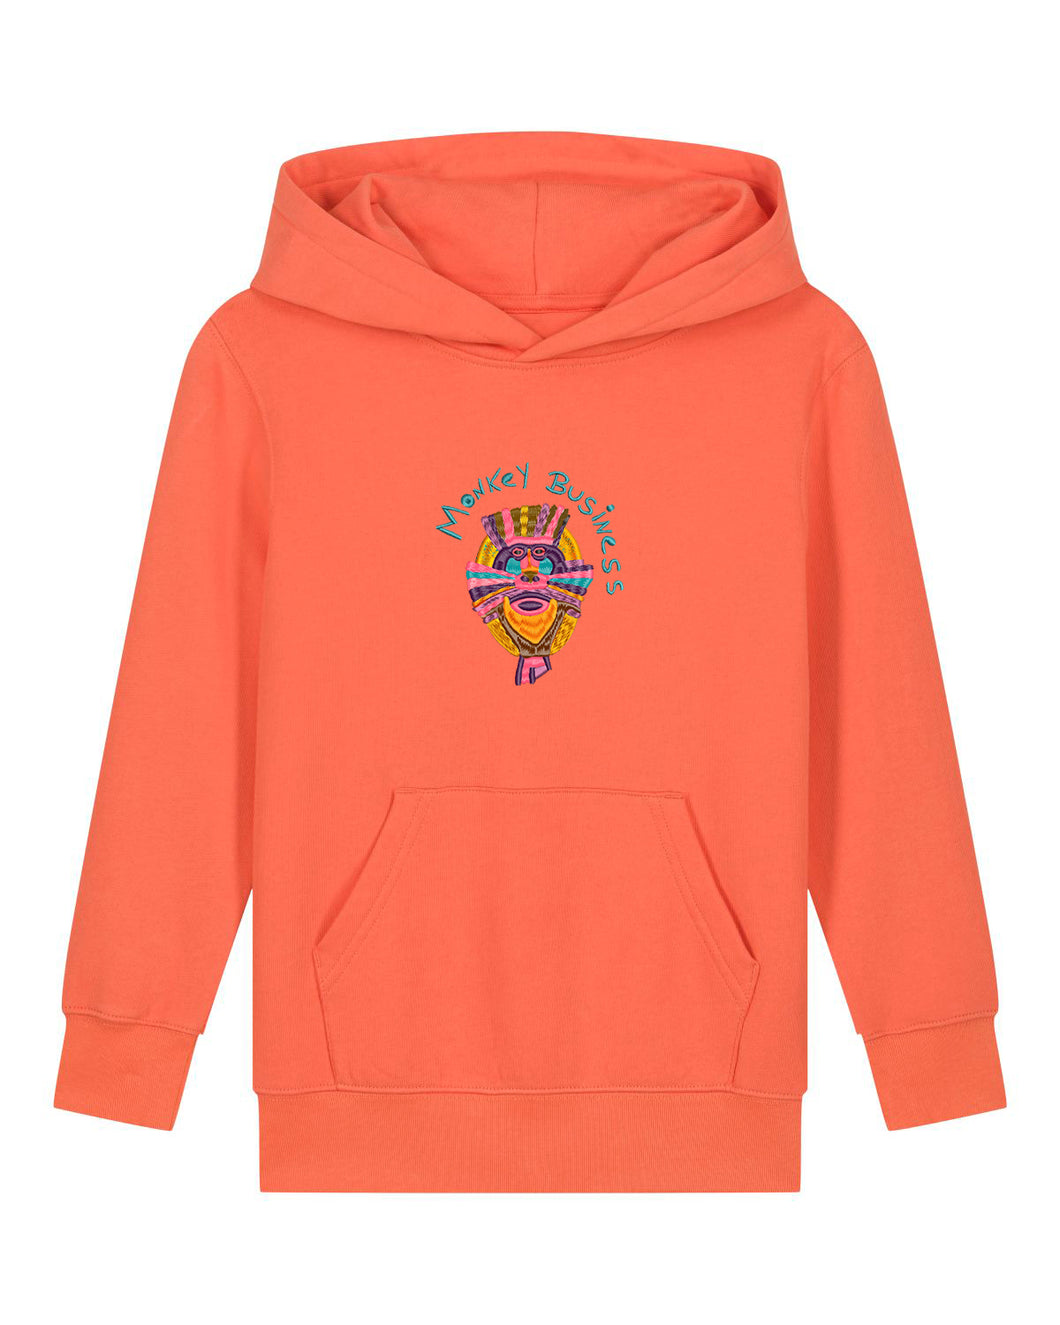 Monkey business 🐵- Embroidered UNISEX KIDS hoodie